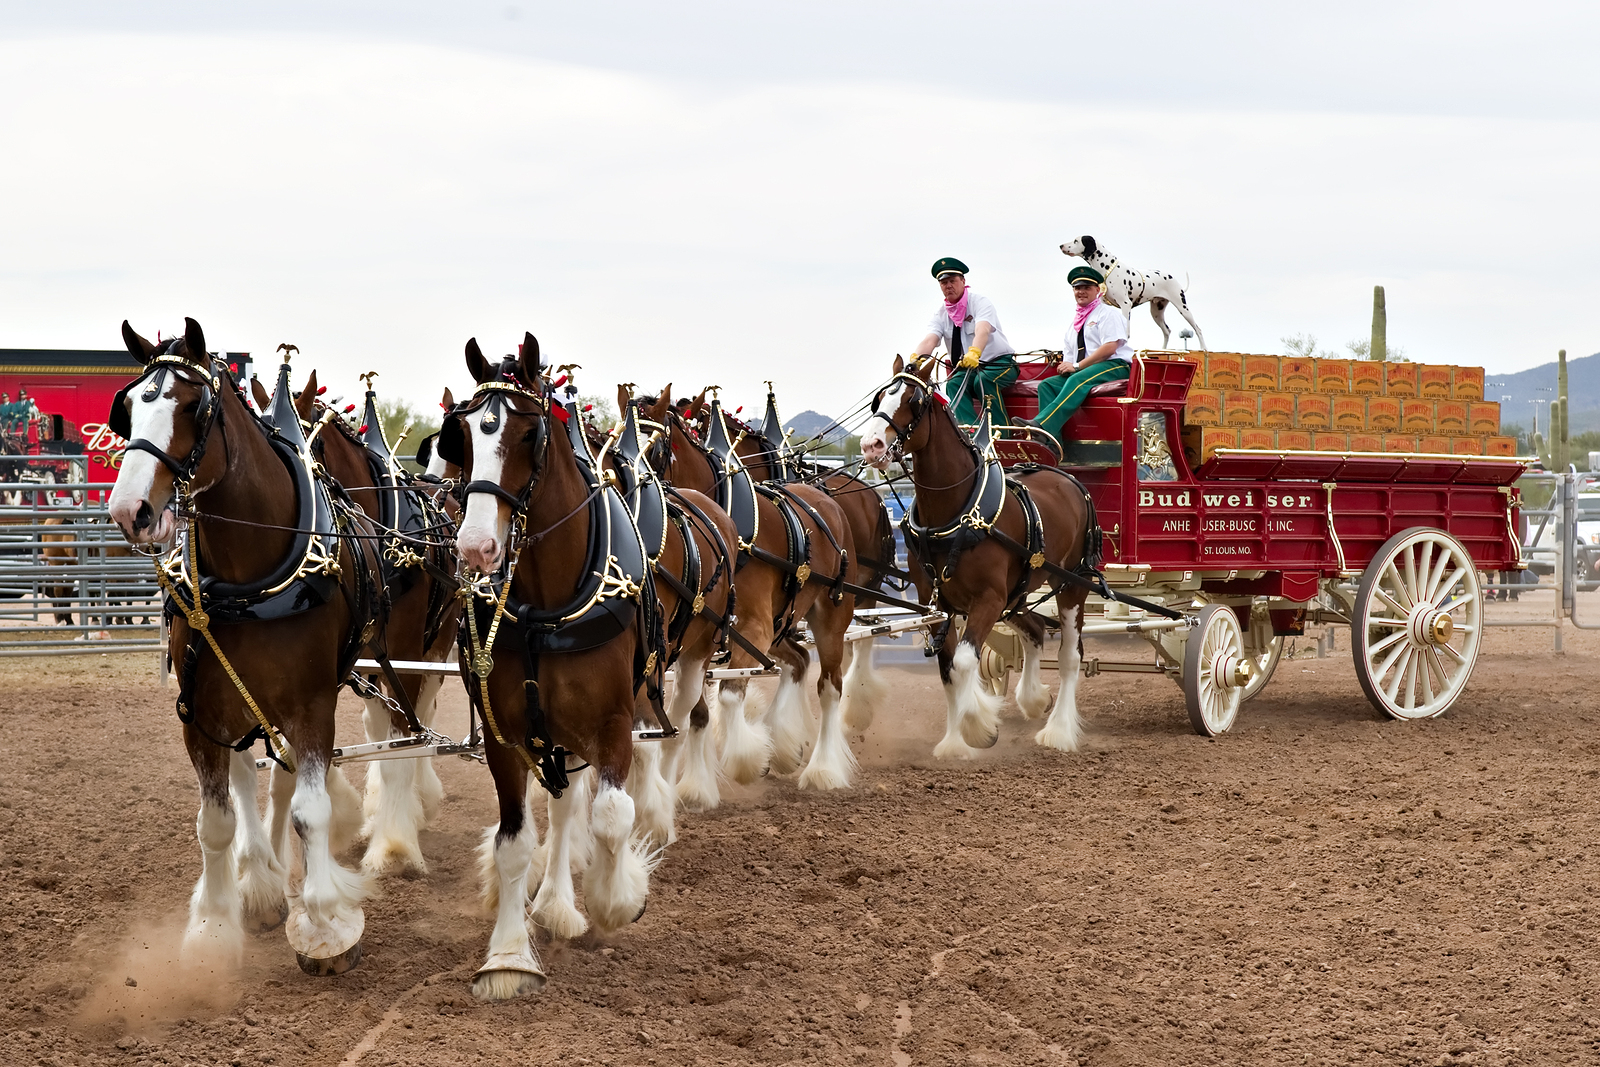 Budweiser Clydesdales performing.